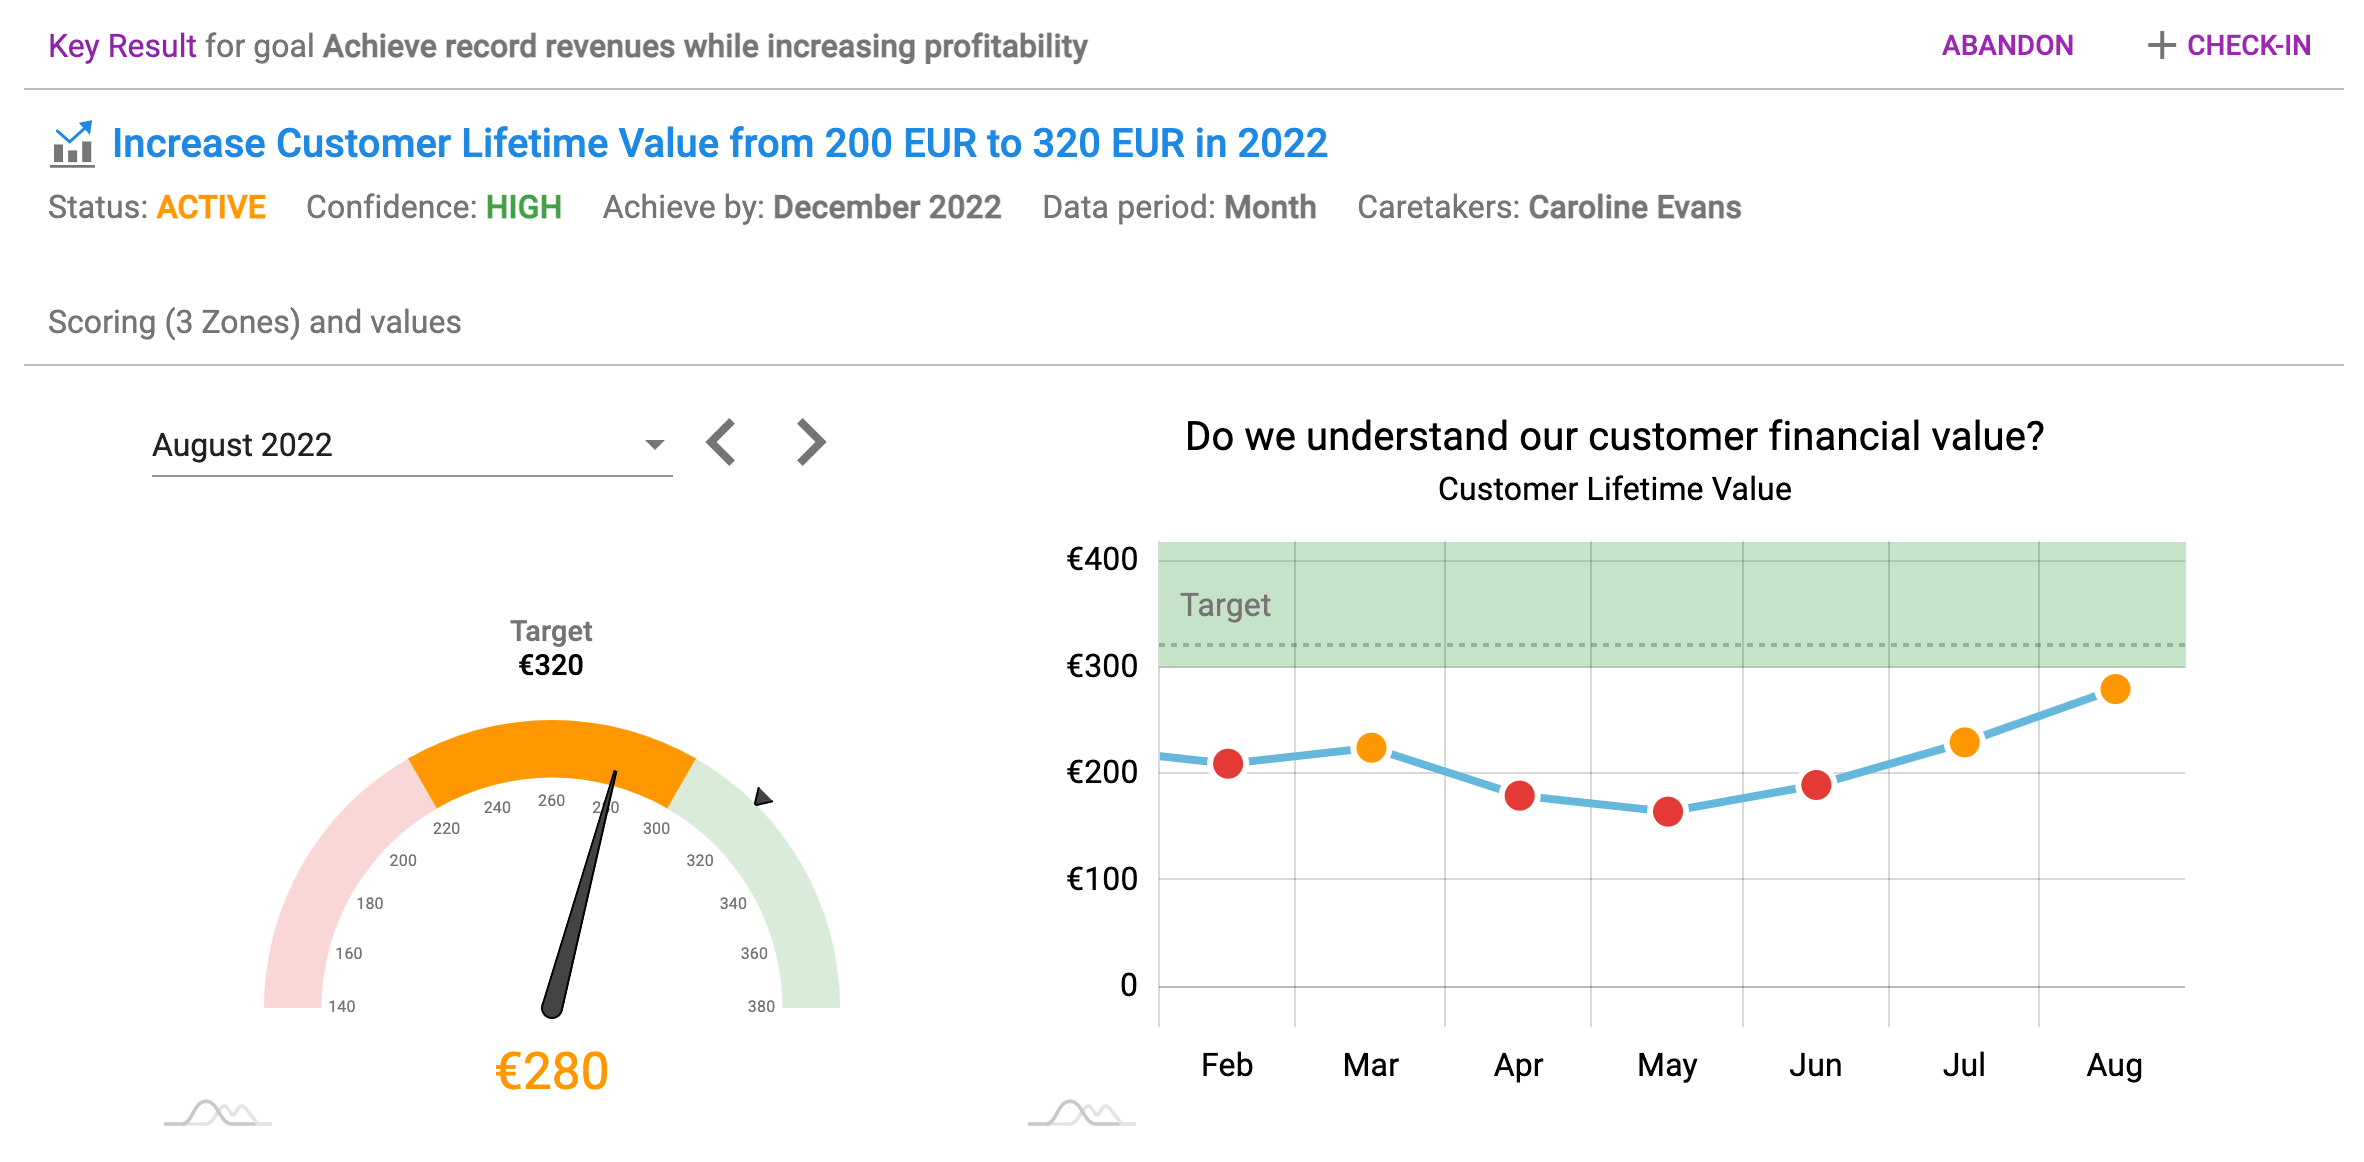 Increase Customer Lifetime Value from 200 EUR to 320 EUR